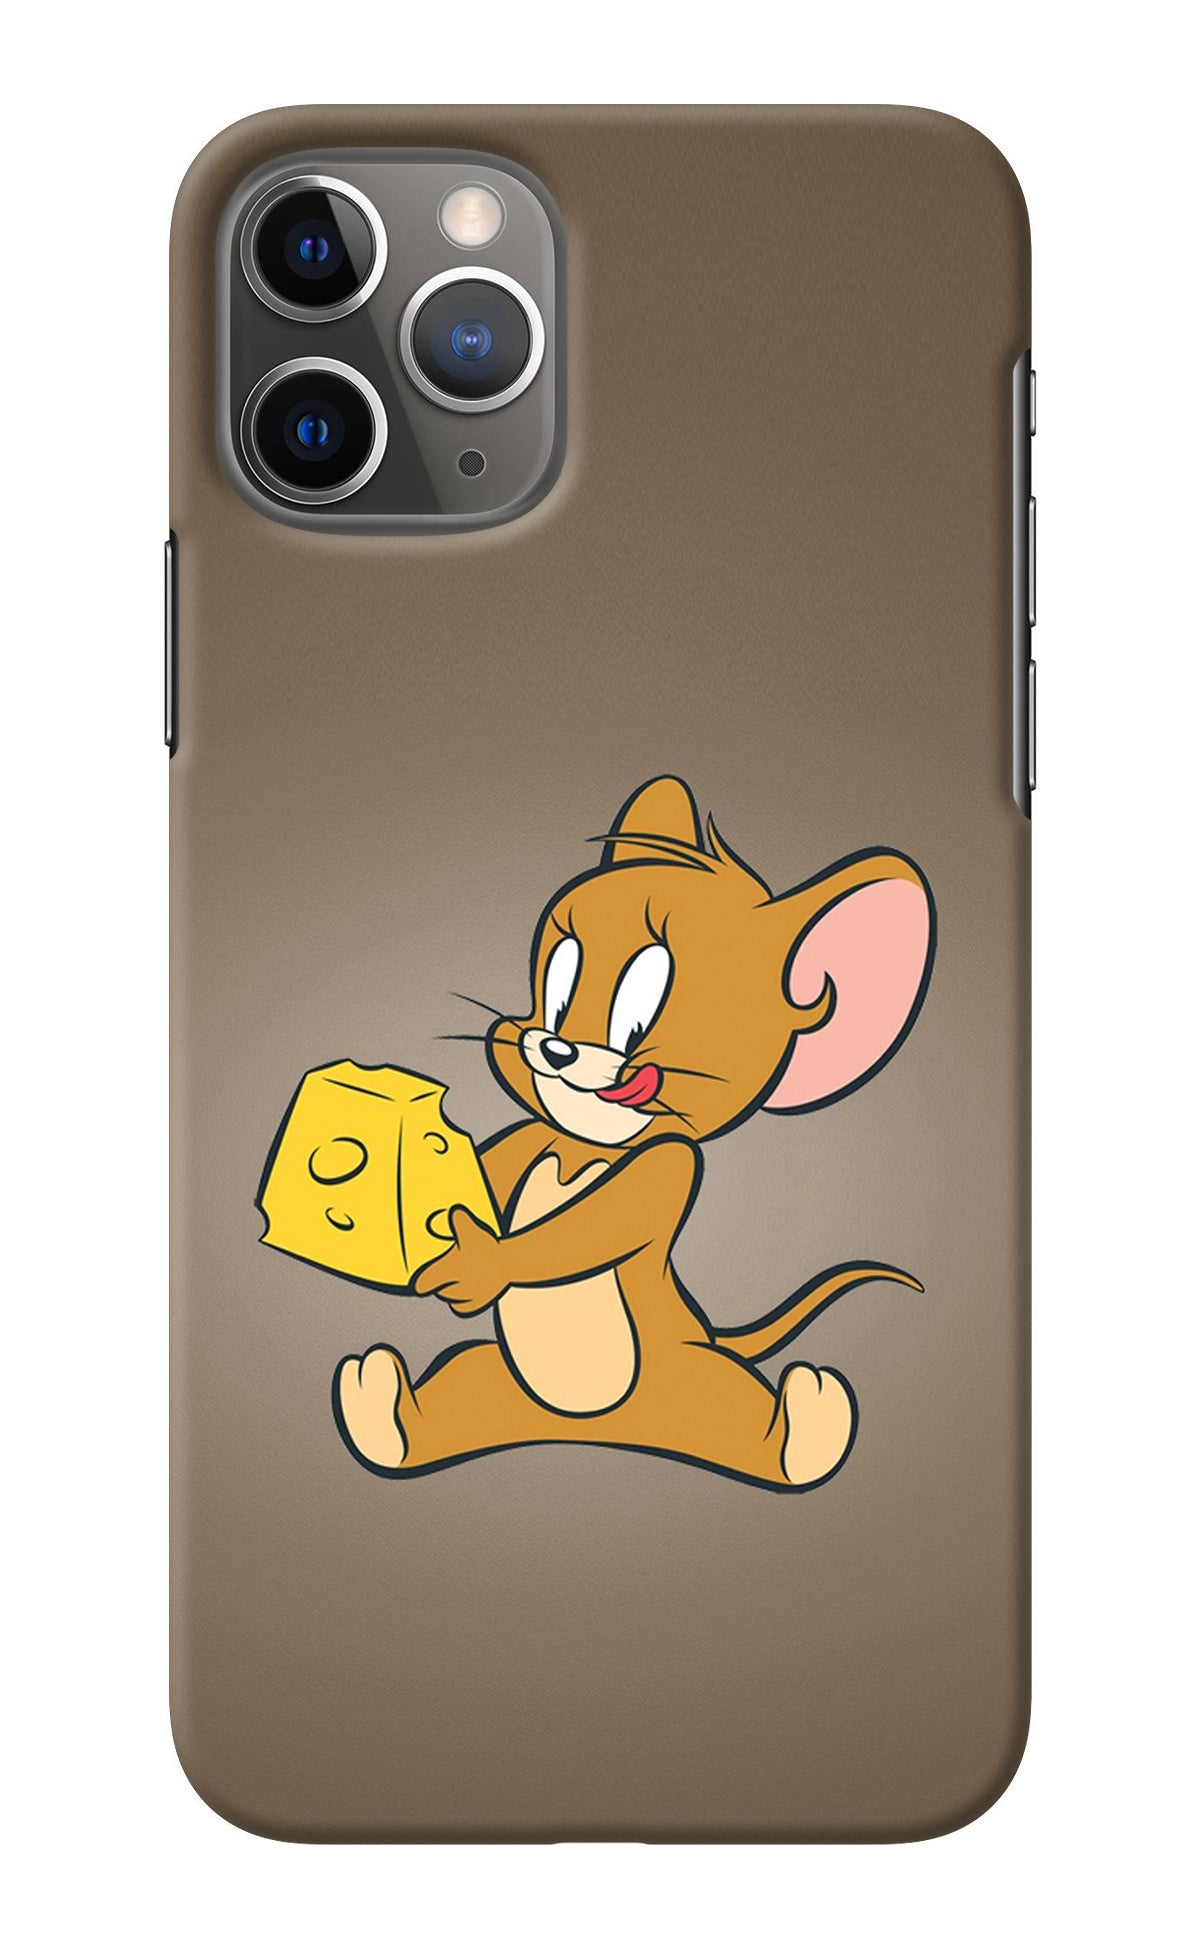 Jerry iPhone 11 Pro Max Back Cover